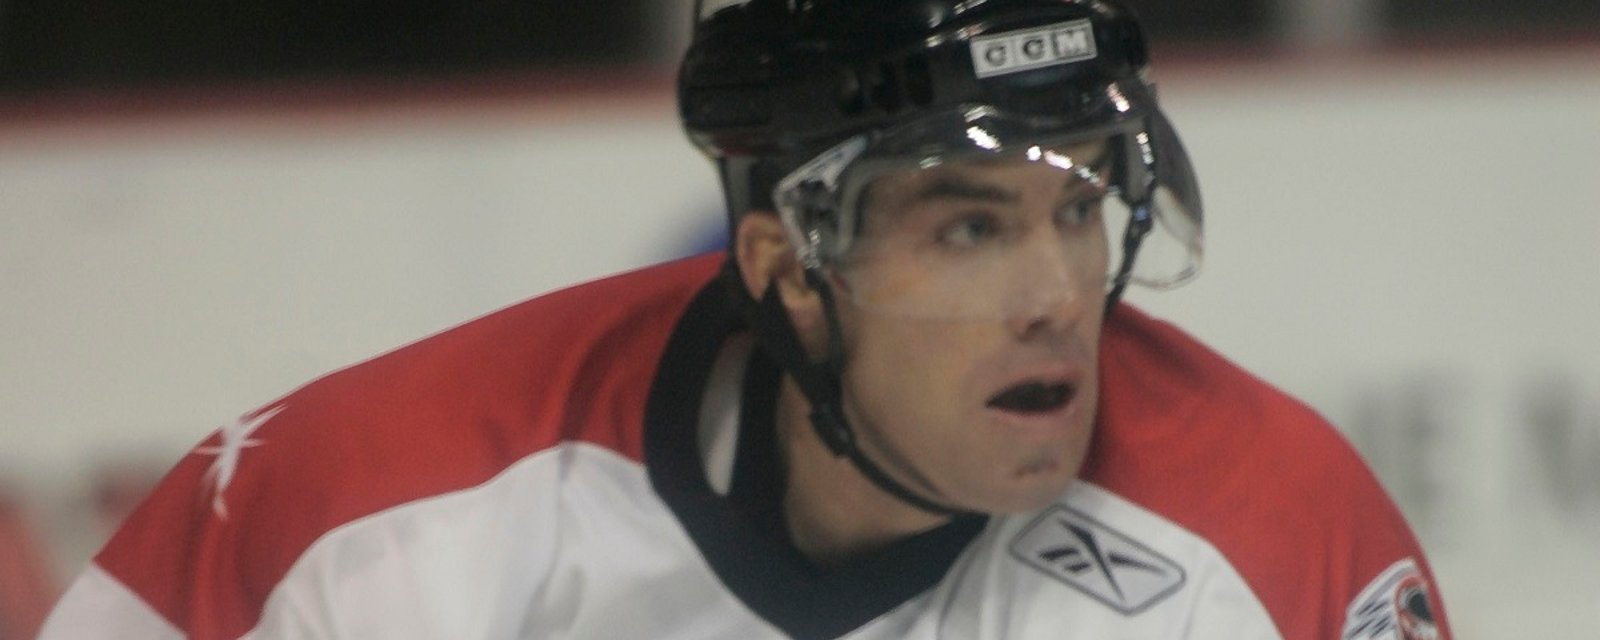 Former NHLer William Tibbets pleads guilty to “handful of charges” after 2 months in jail.